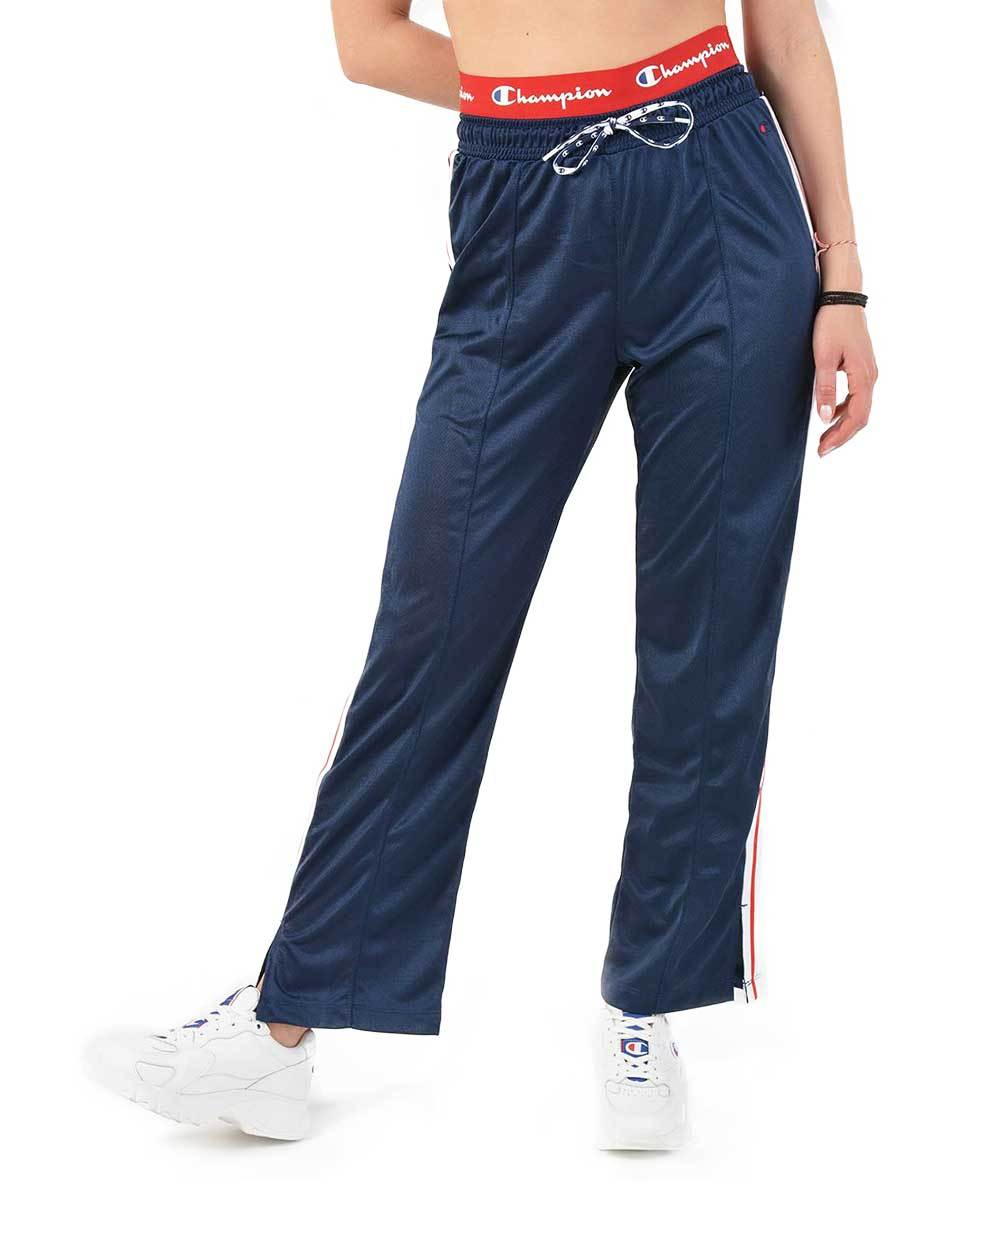 Champion Navy Blue Pants with Stripes